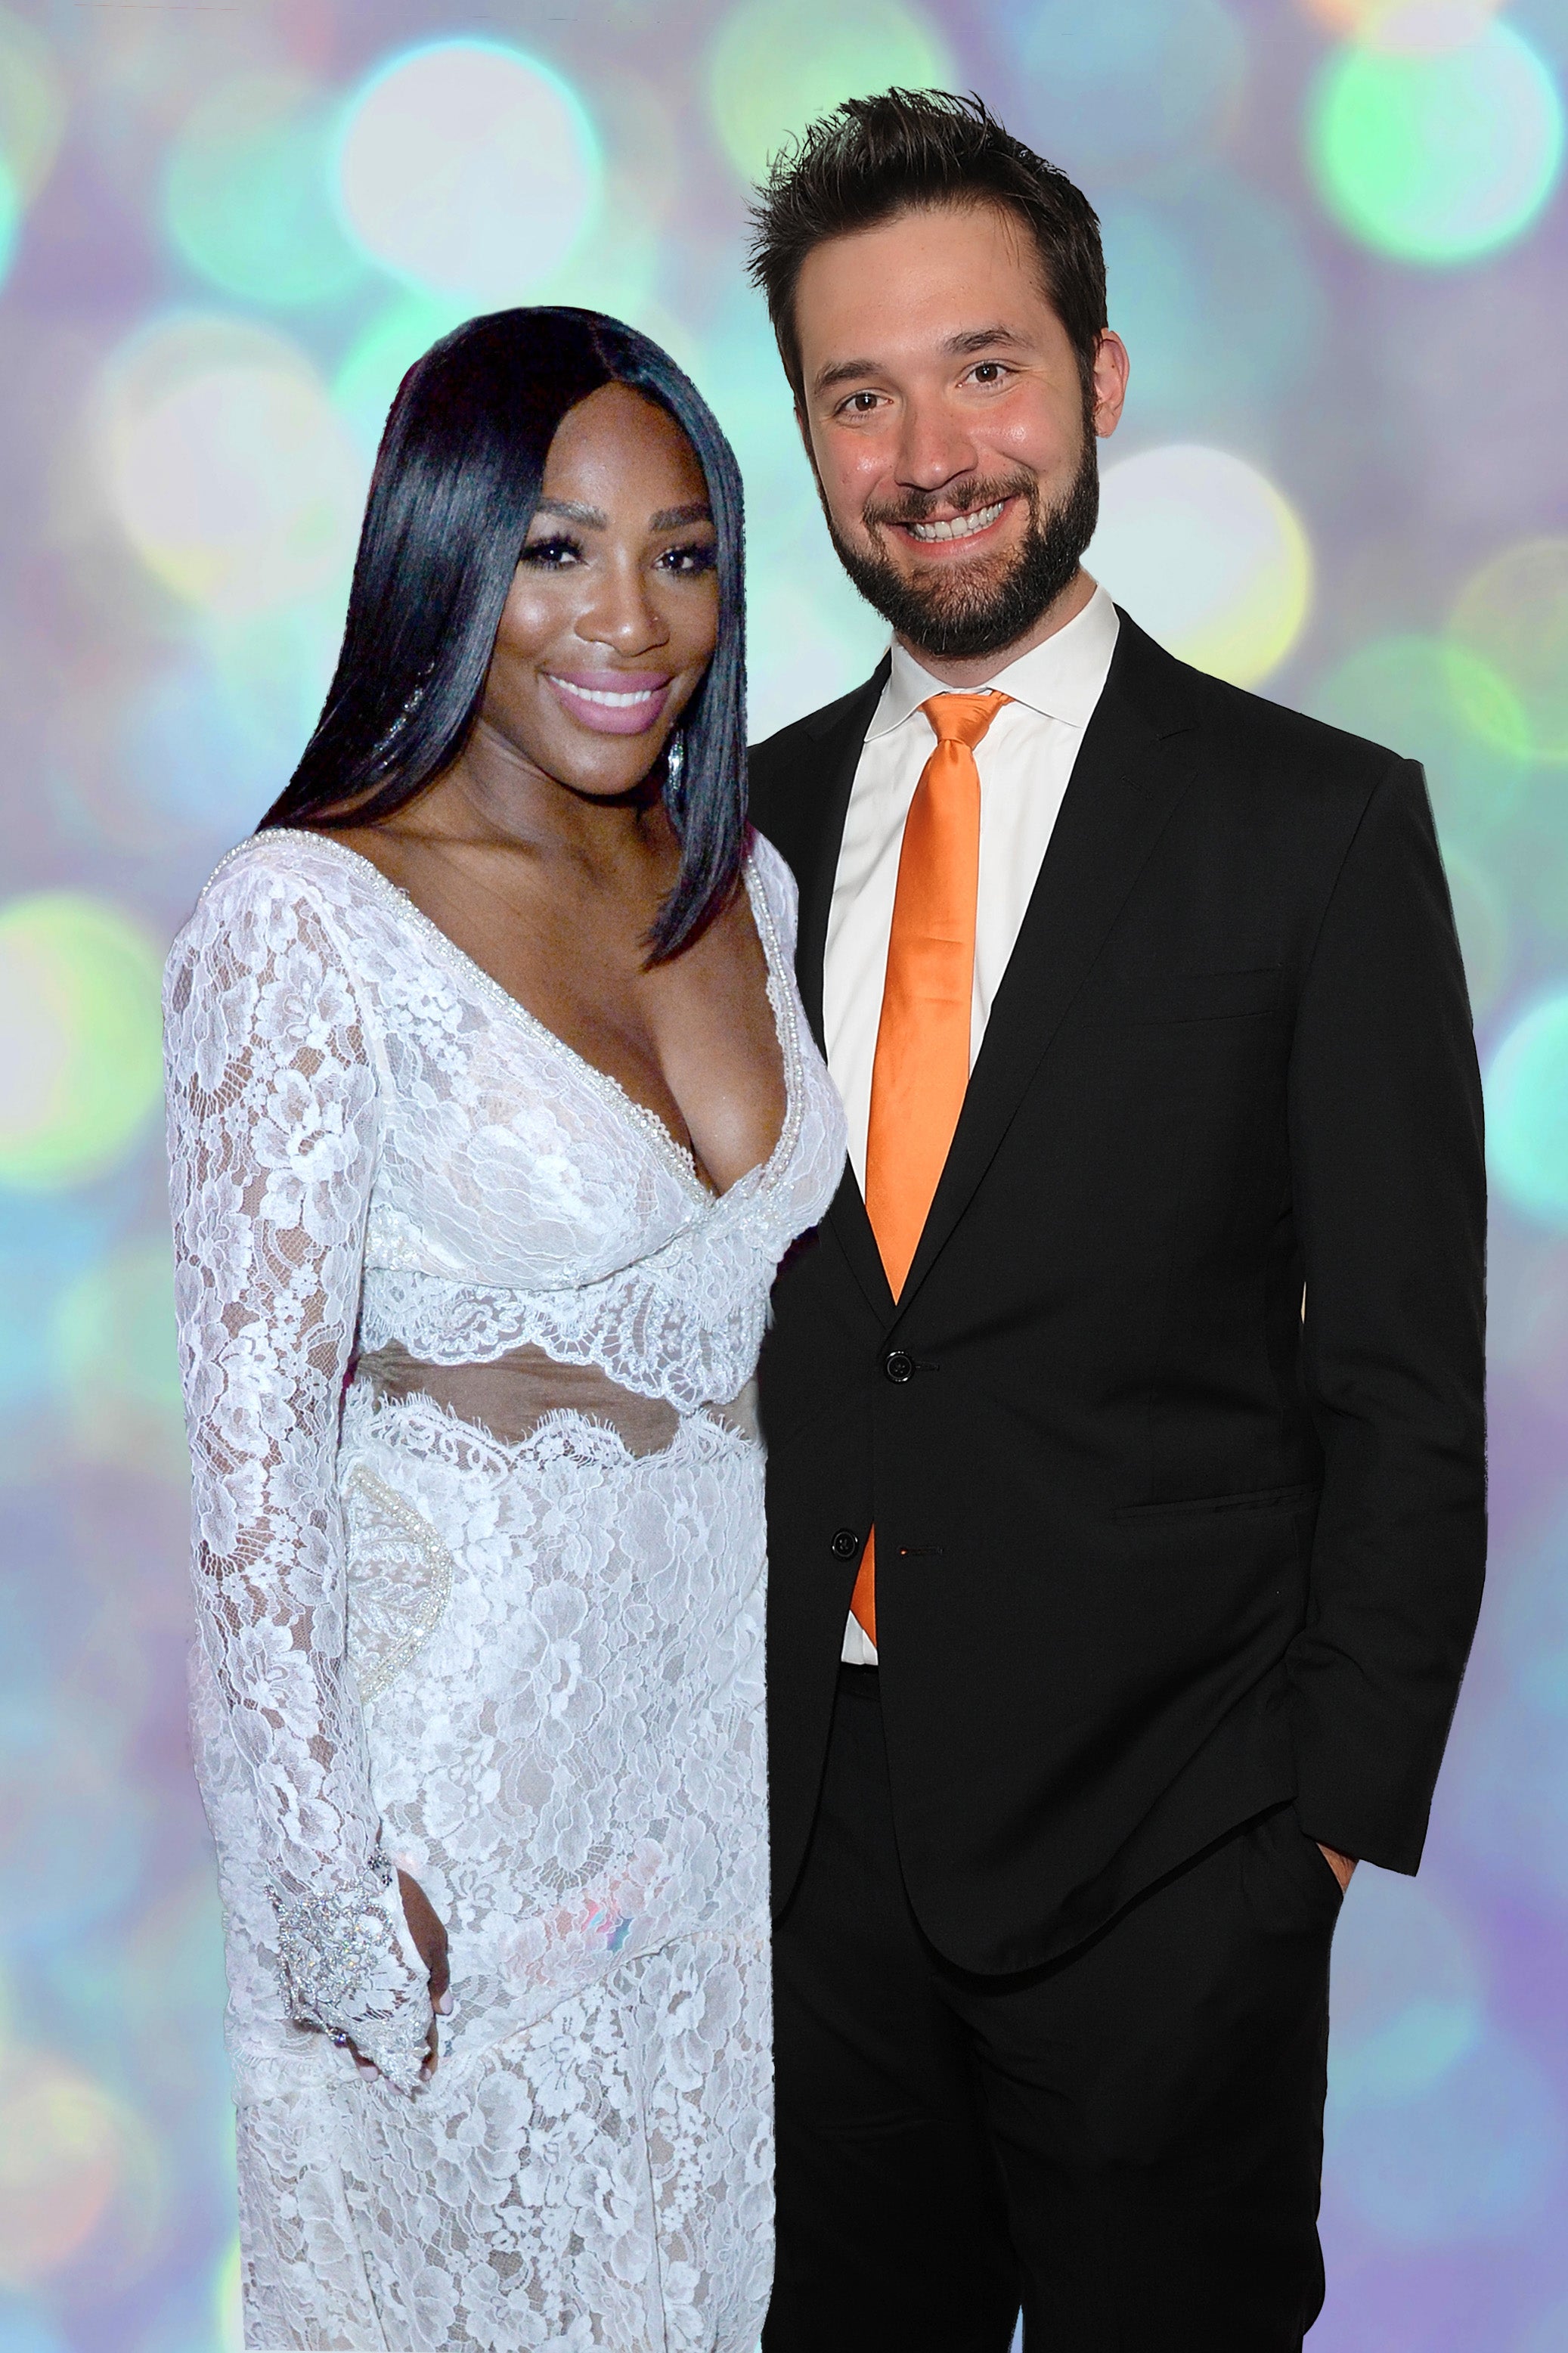 Serena Williams’ Husband Alexis Ohanian Penned The Sweetest Message After Her Wimbledon Loss: 'She's Just Getting Started'
